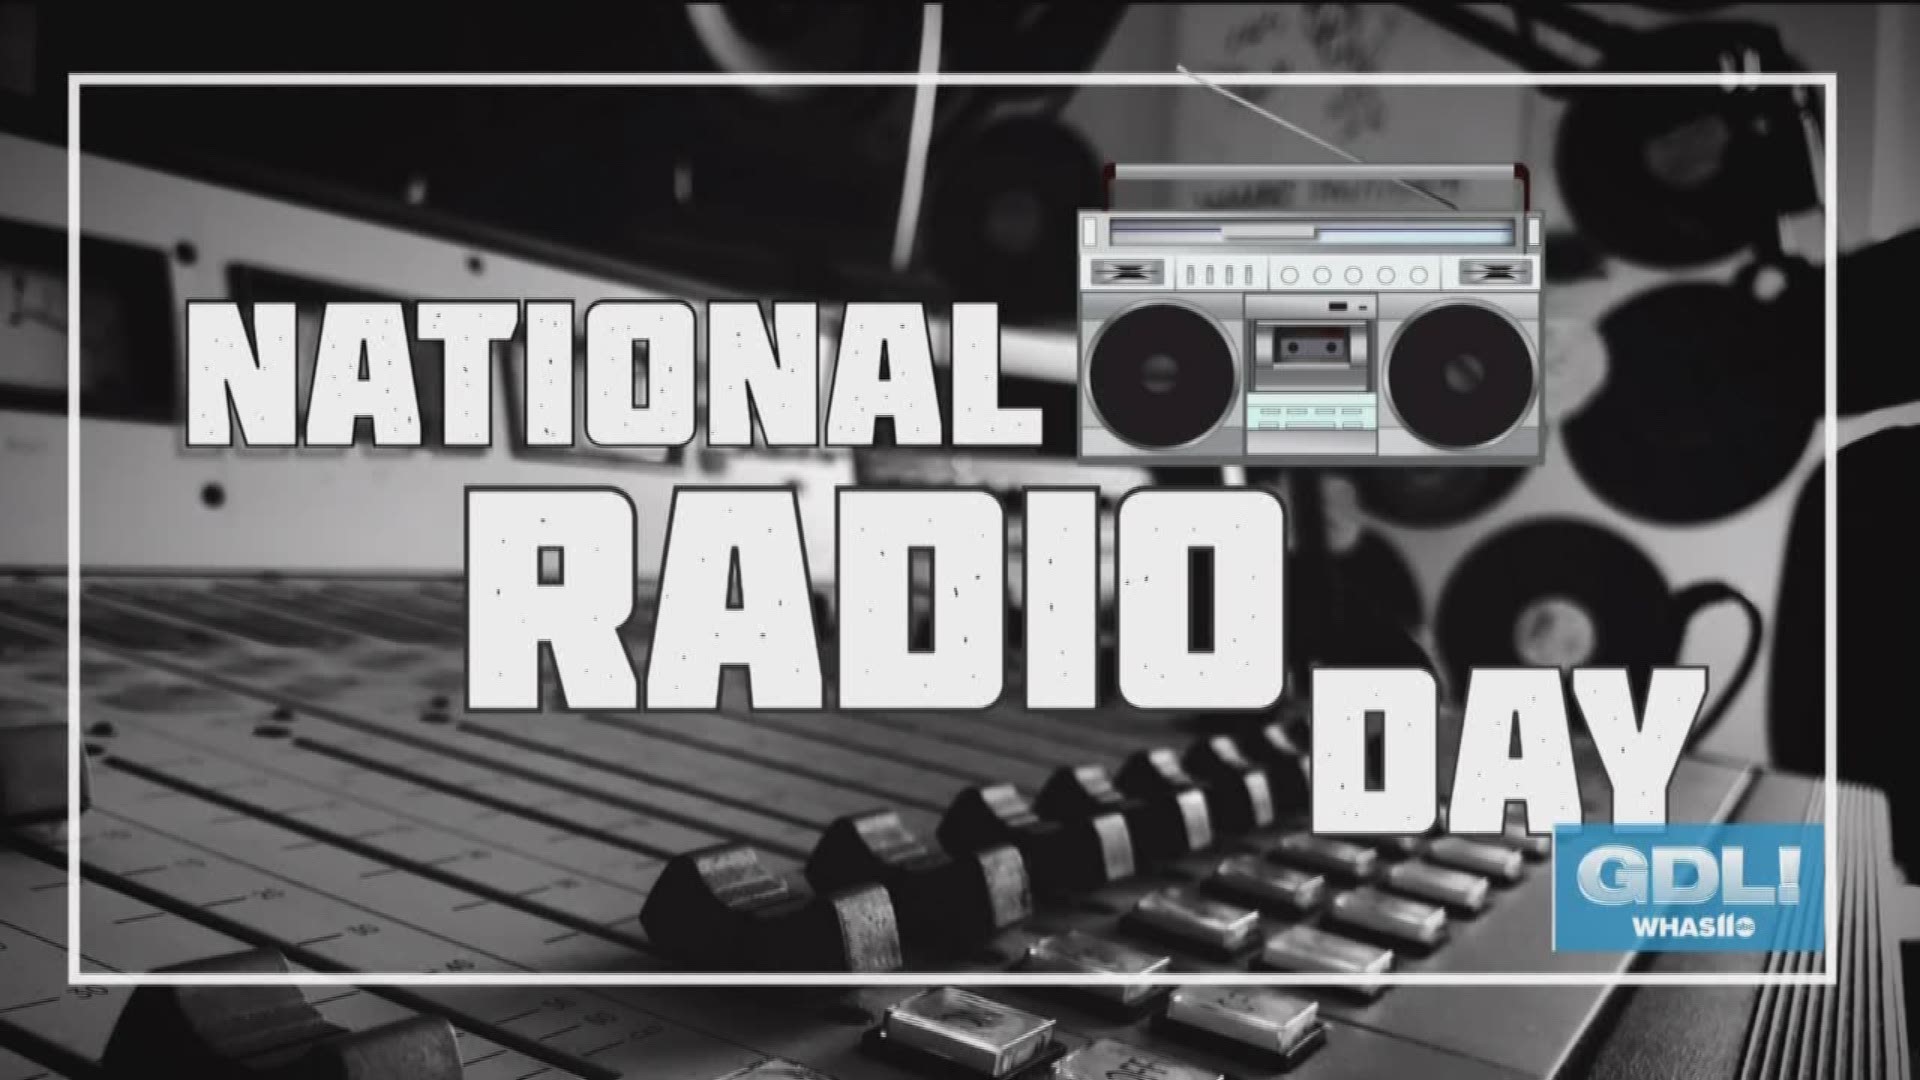 In honor of National Radio Day we asked your favorite radio DJs to share their craziest stories.